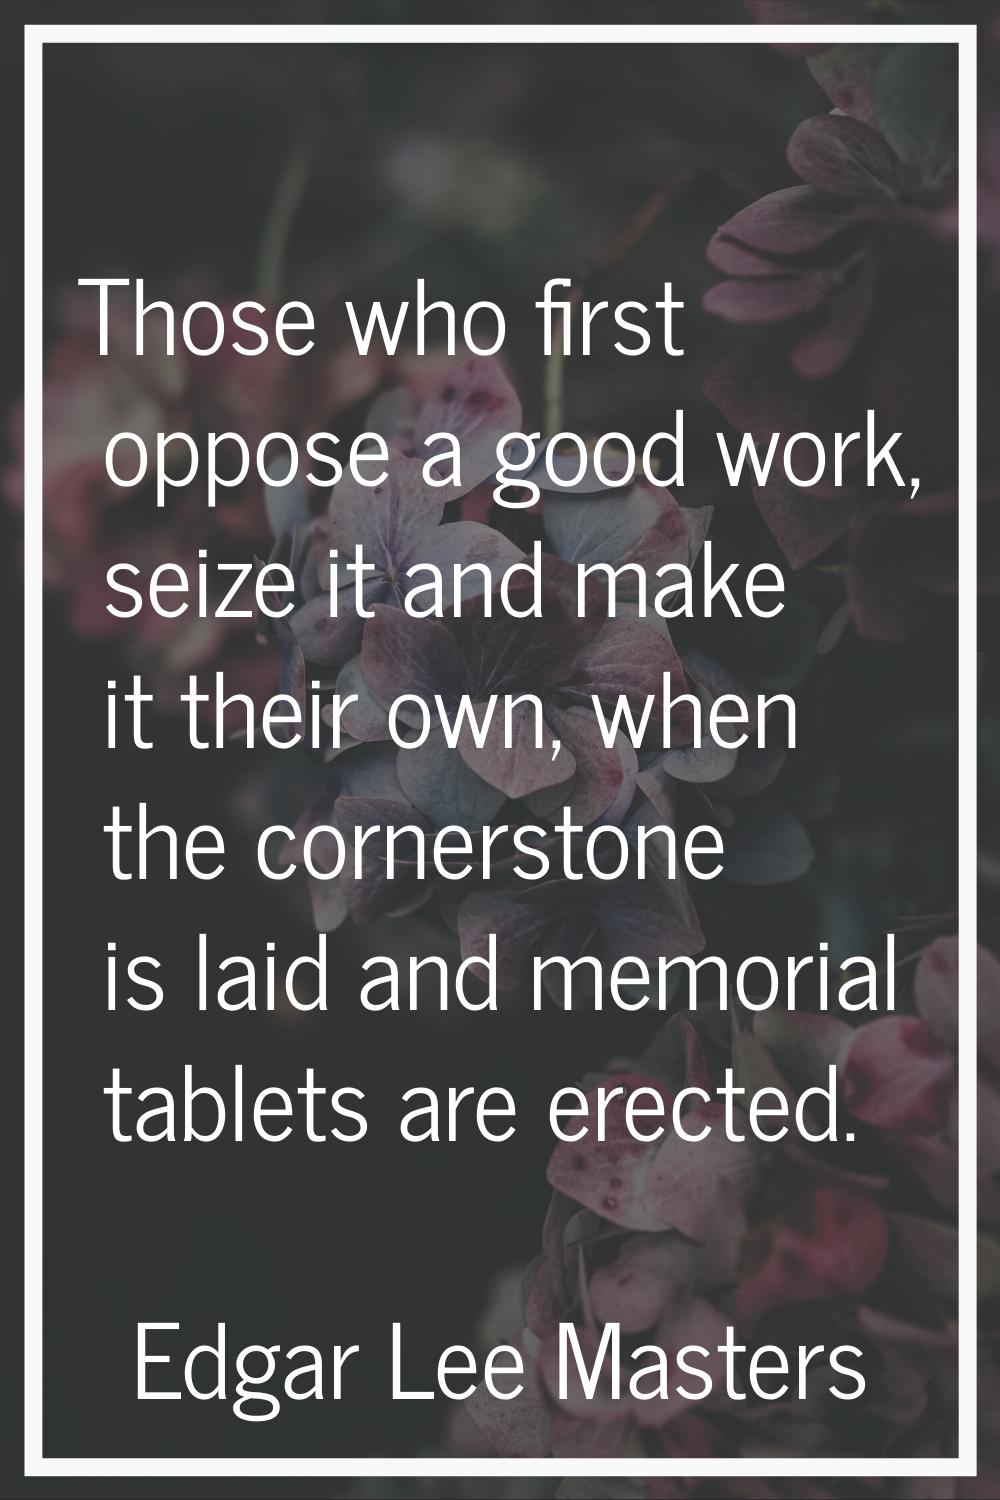 Those who first oppose a good work, seize it and make it their own, when the cornerstone is laid an